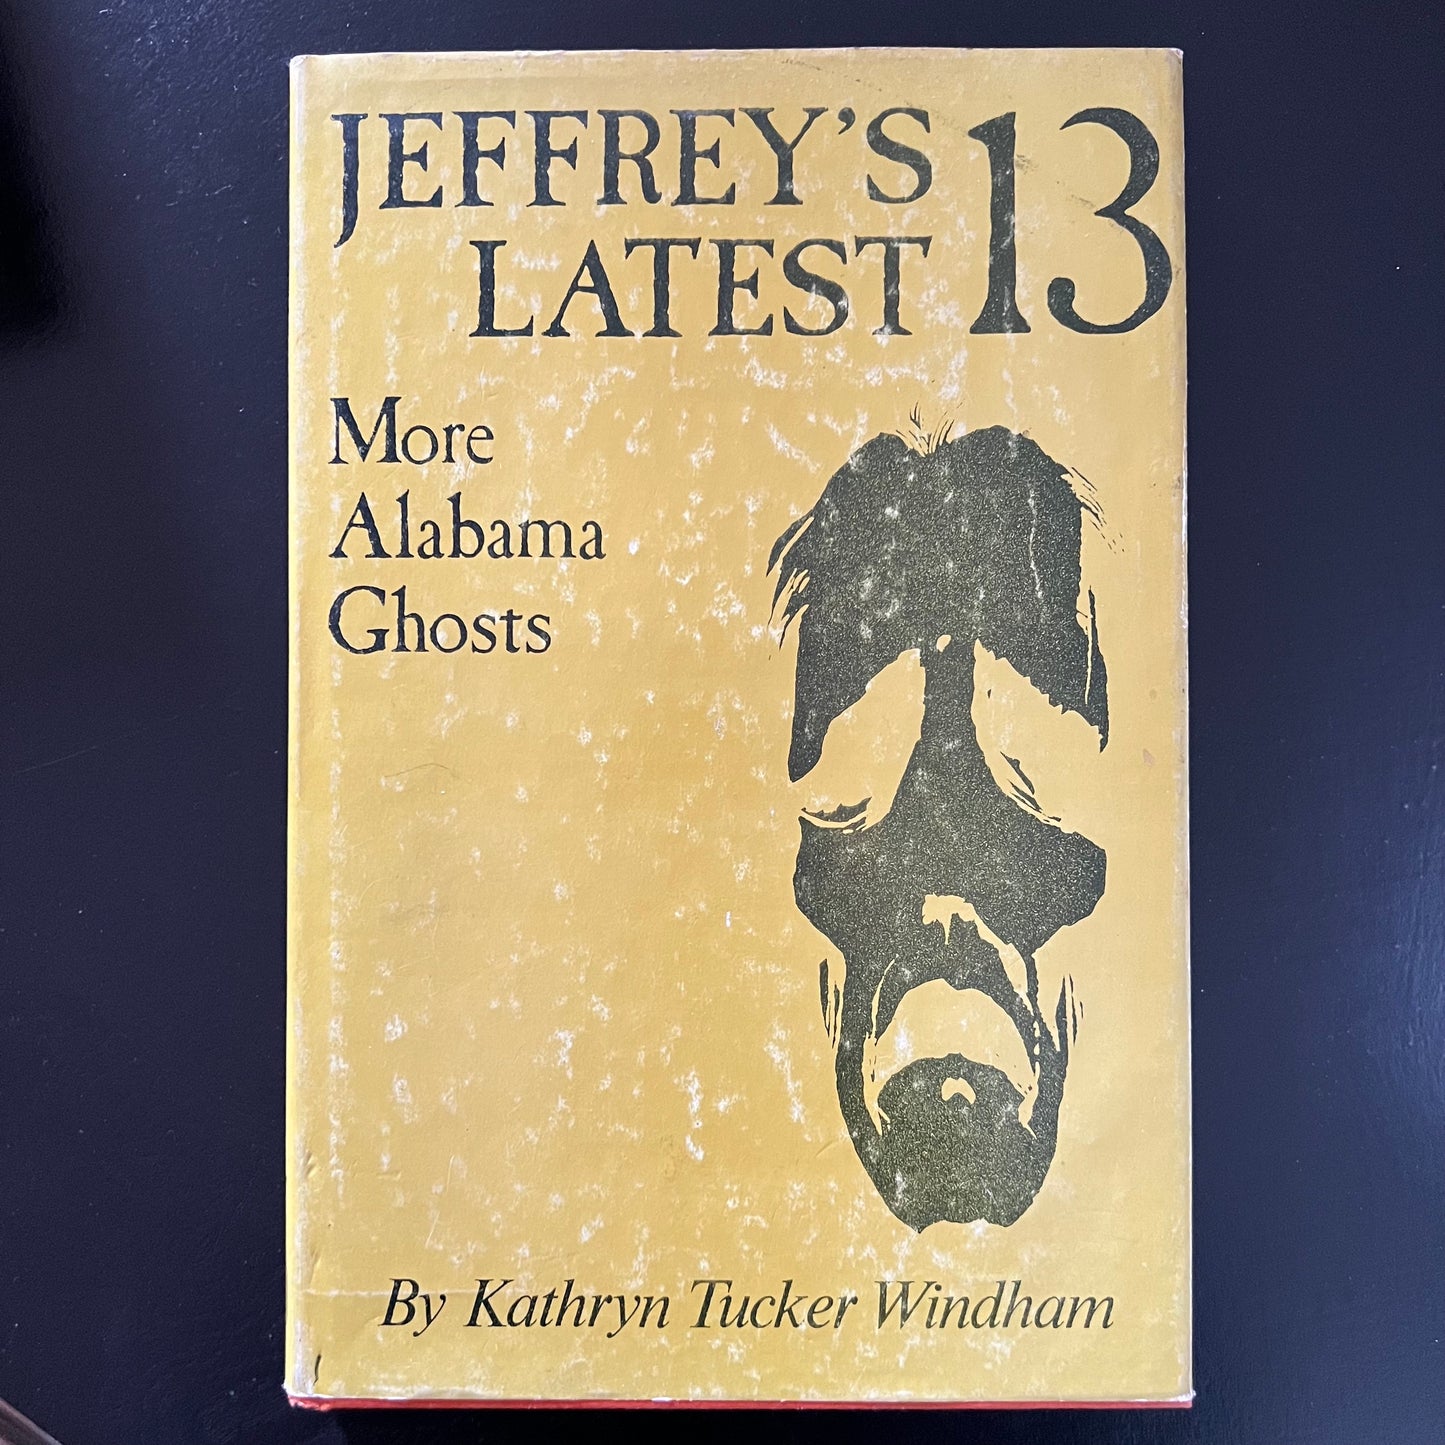 Jeffrey's Latest 13- More Alabama Ghosts, Book by Kathryn Tucker Windham